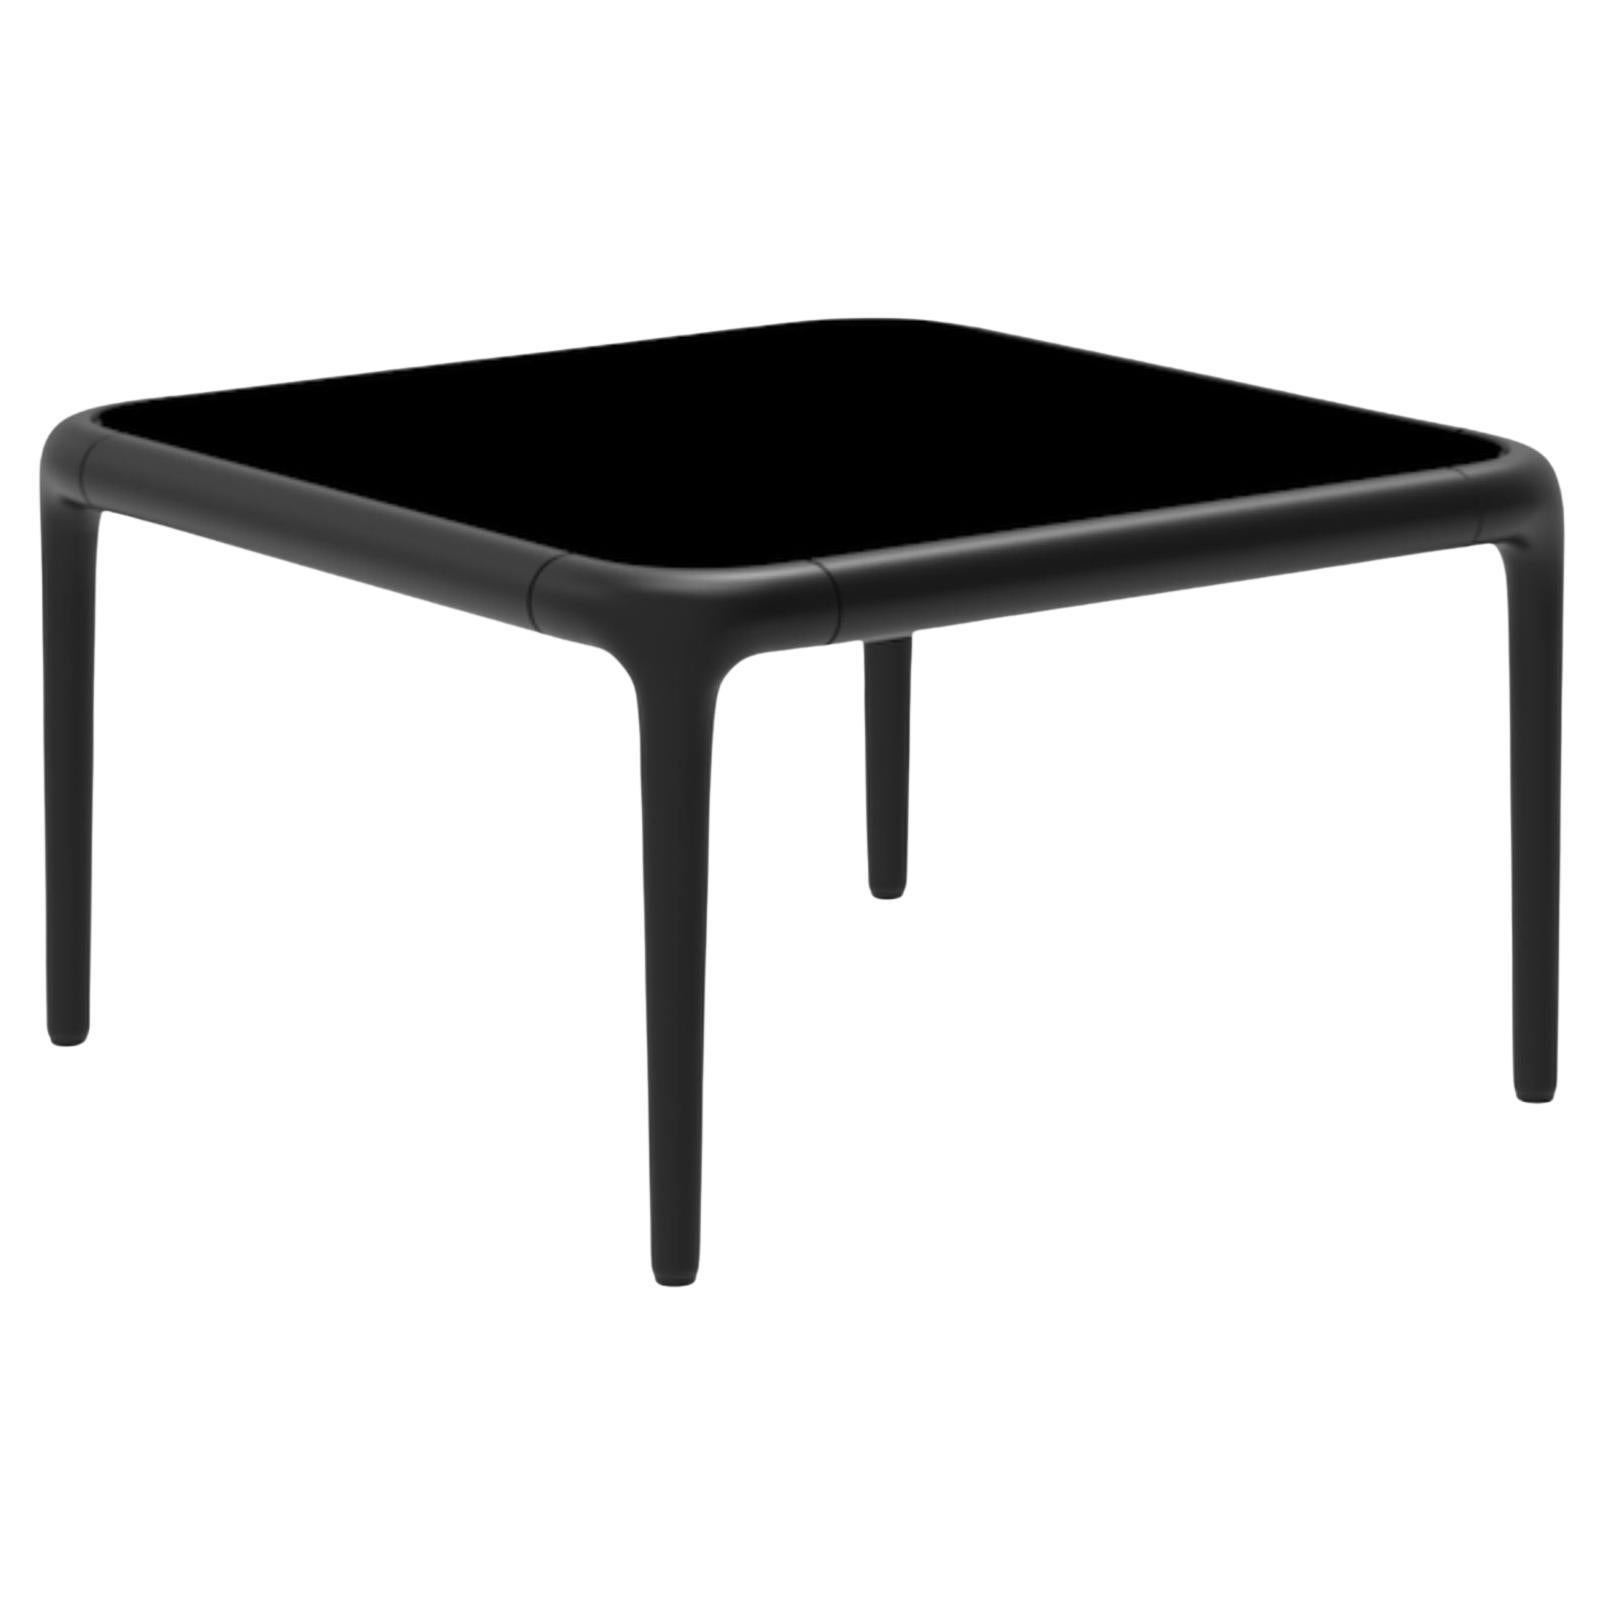 Xaloc Black Coffee Table 50 with Glass Top by Mowee